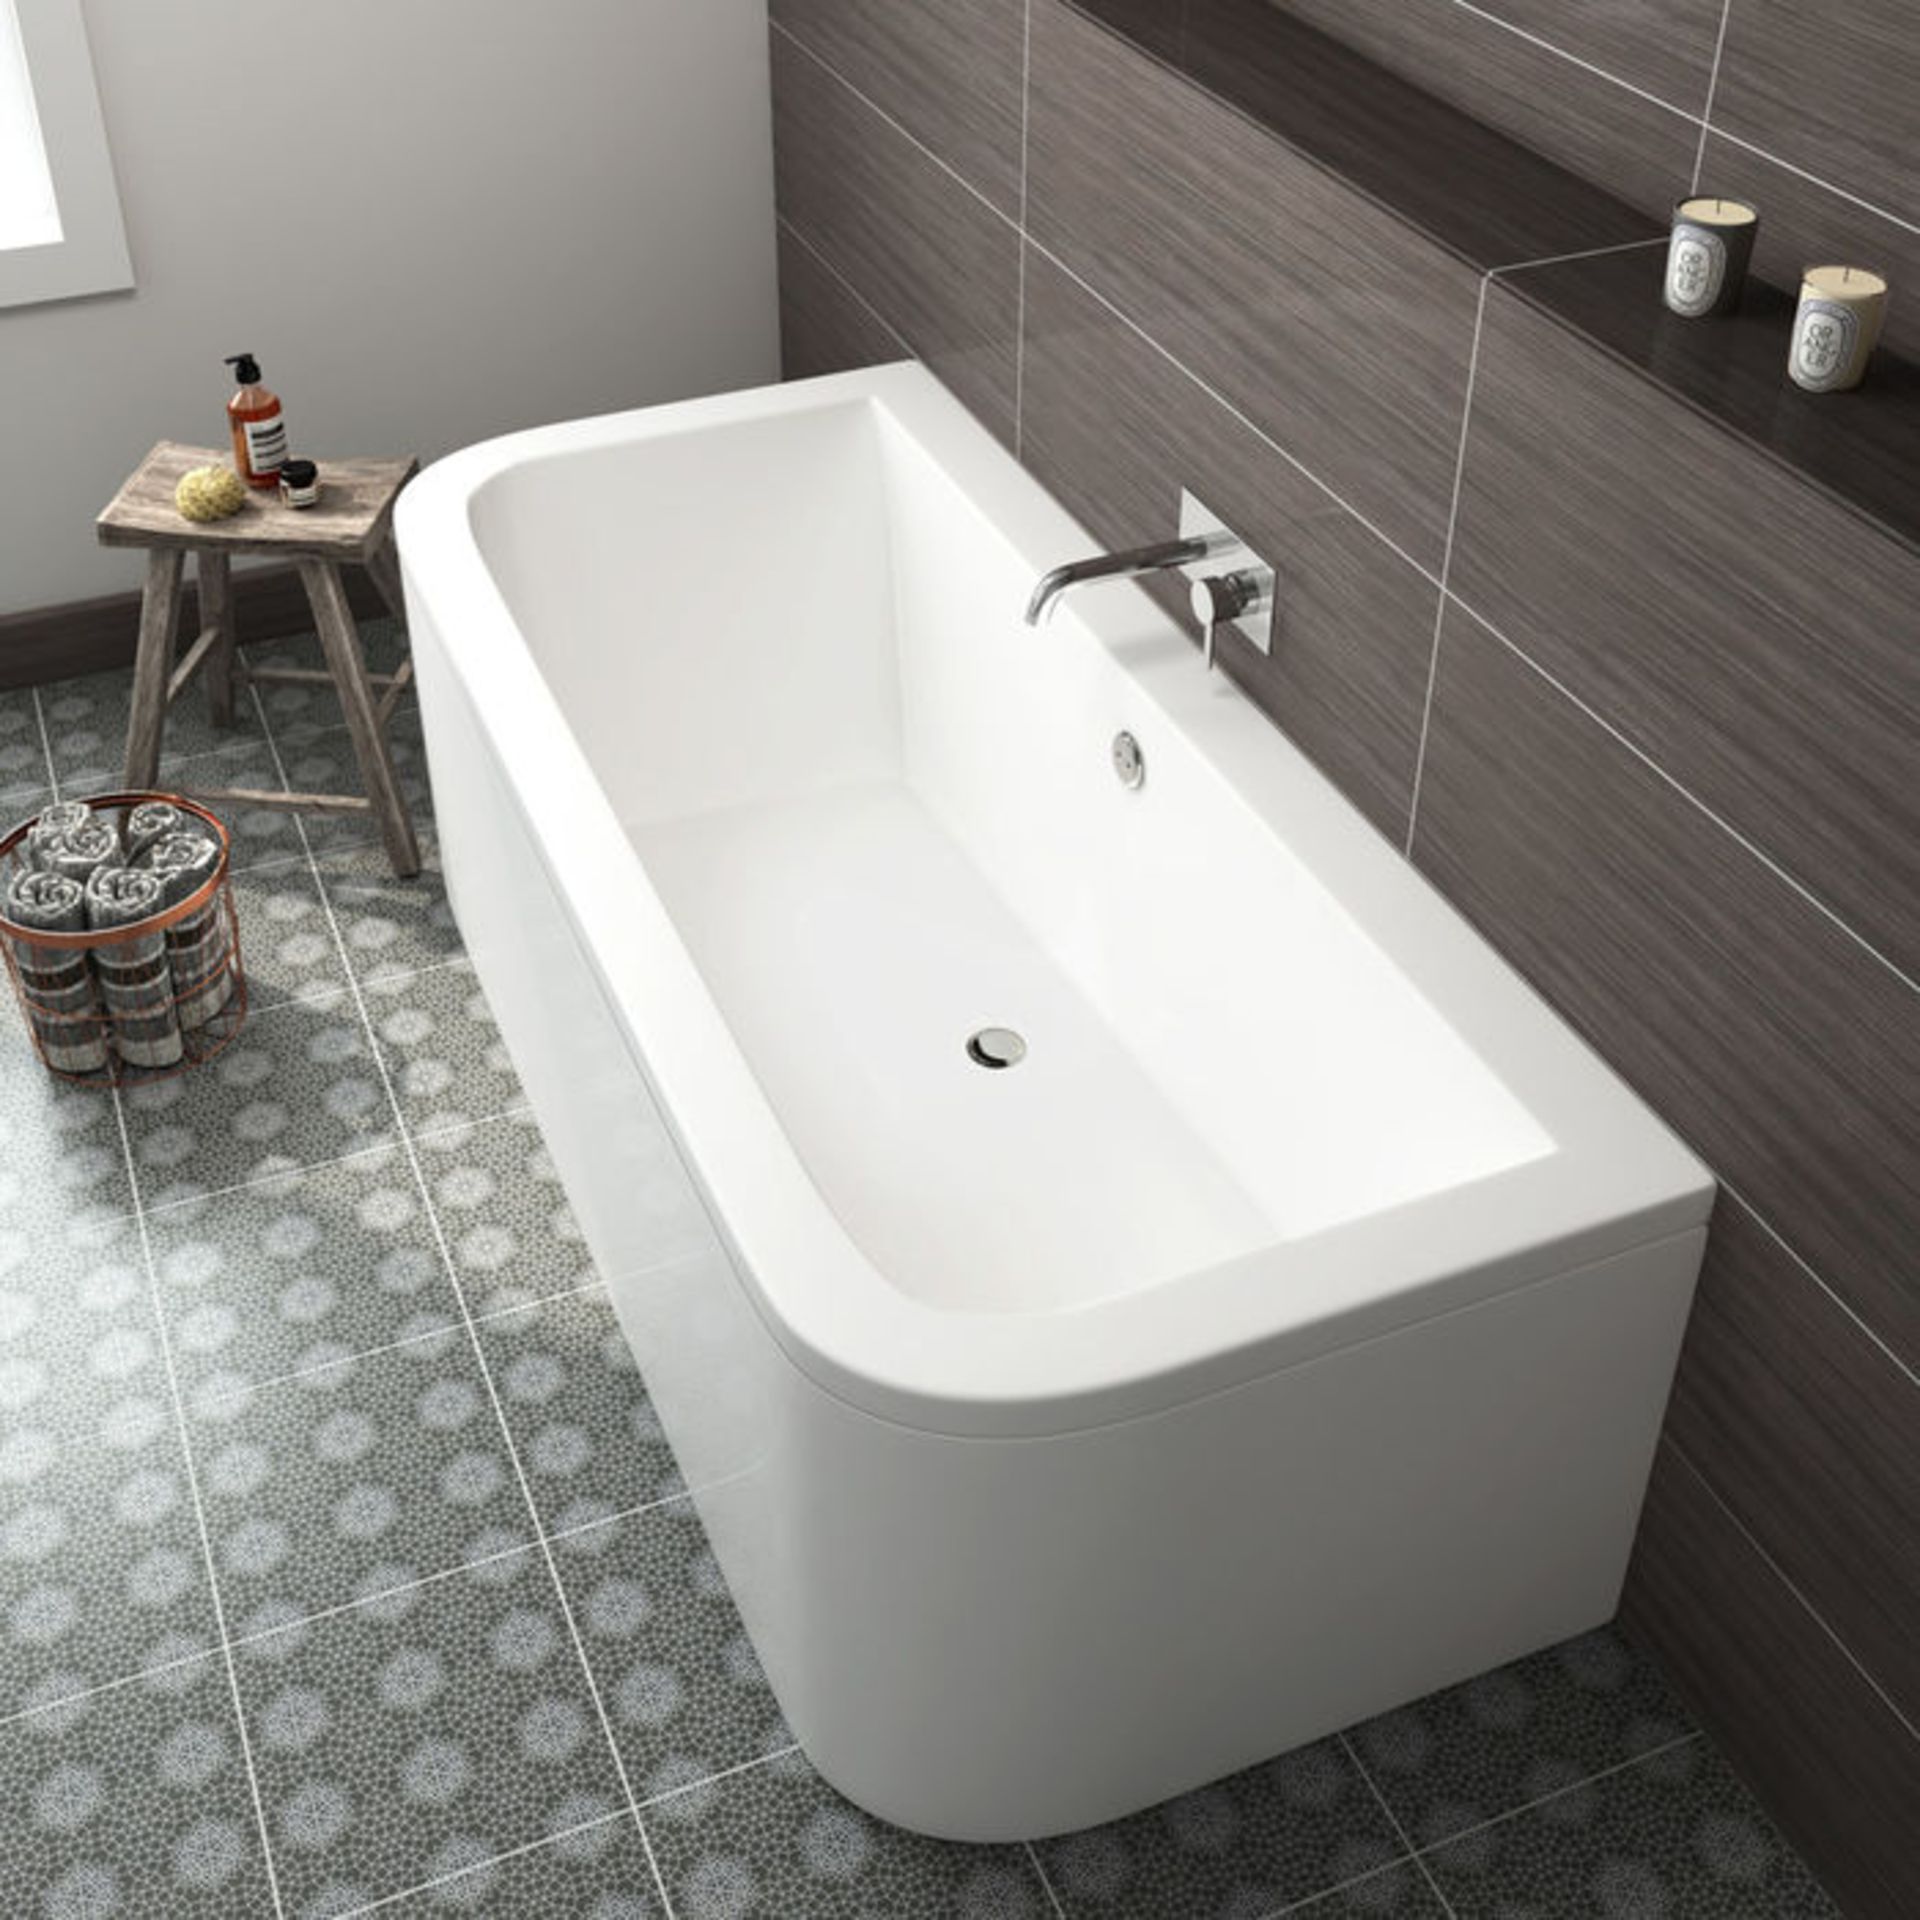 (PA43) 1800x850x460mm Back to Wall Bath - Large. RRP £589.99. The double ended feature makes this